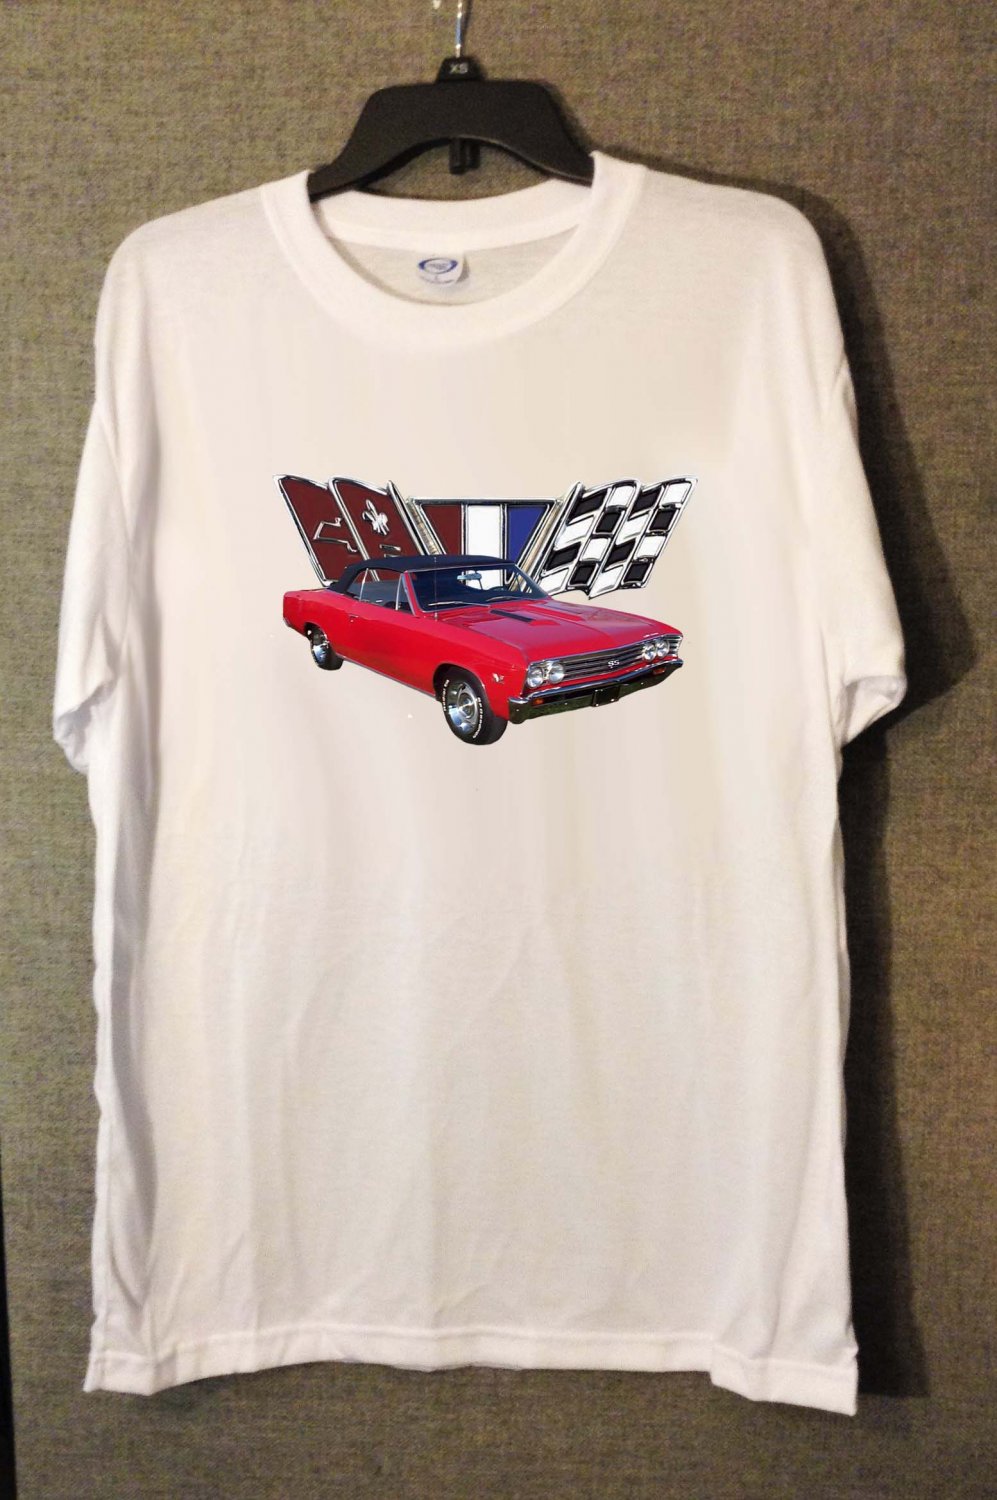 New Red with Black top 1966 Chevy Chevelle Flag LOGO white T-shirt  (Large)